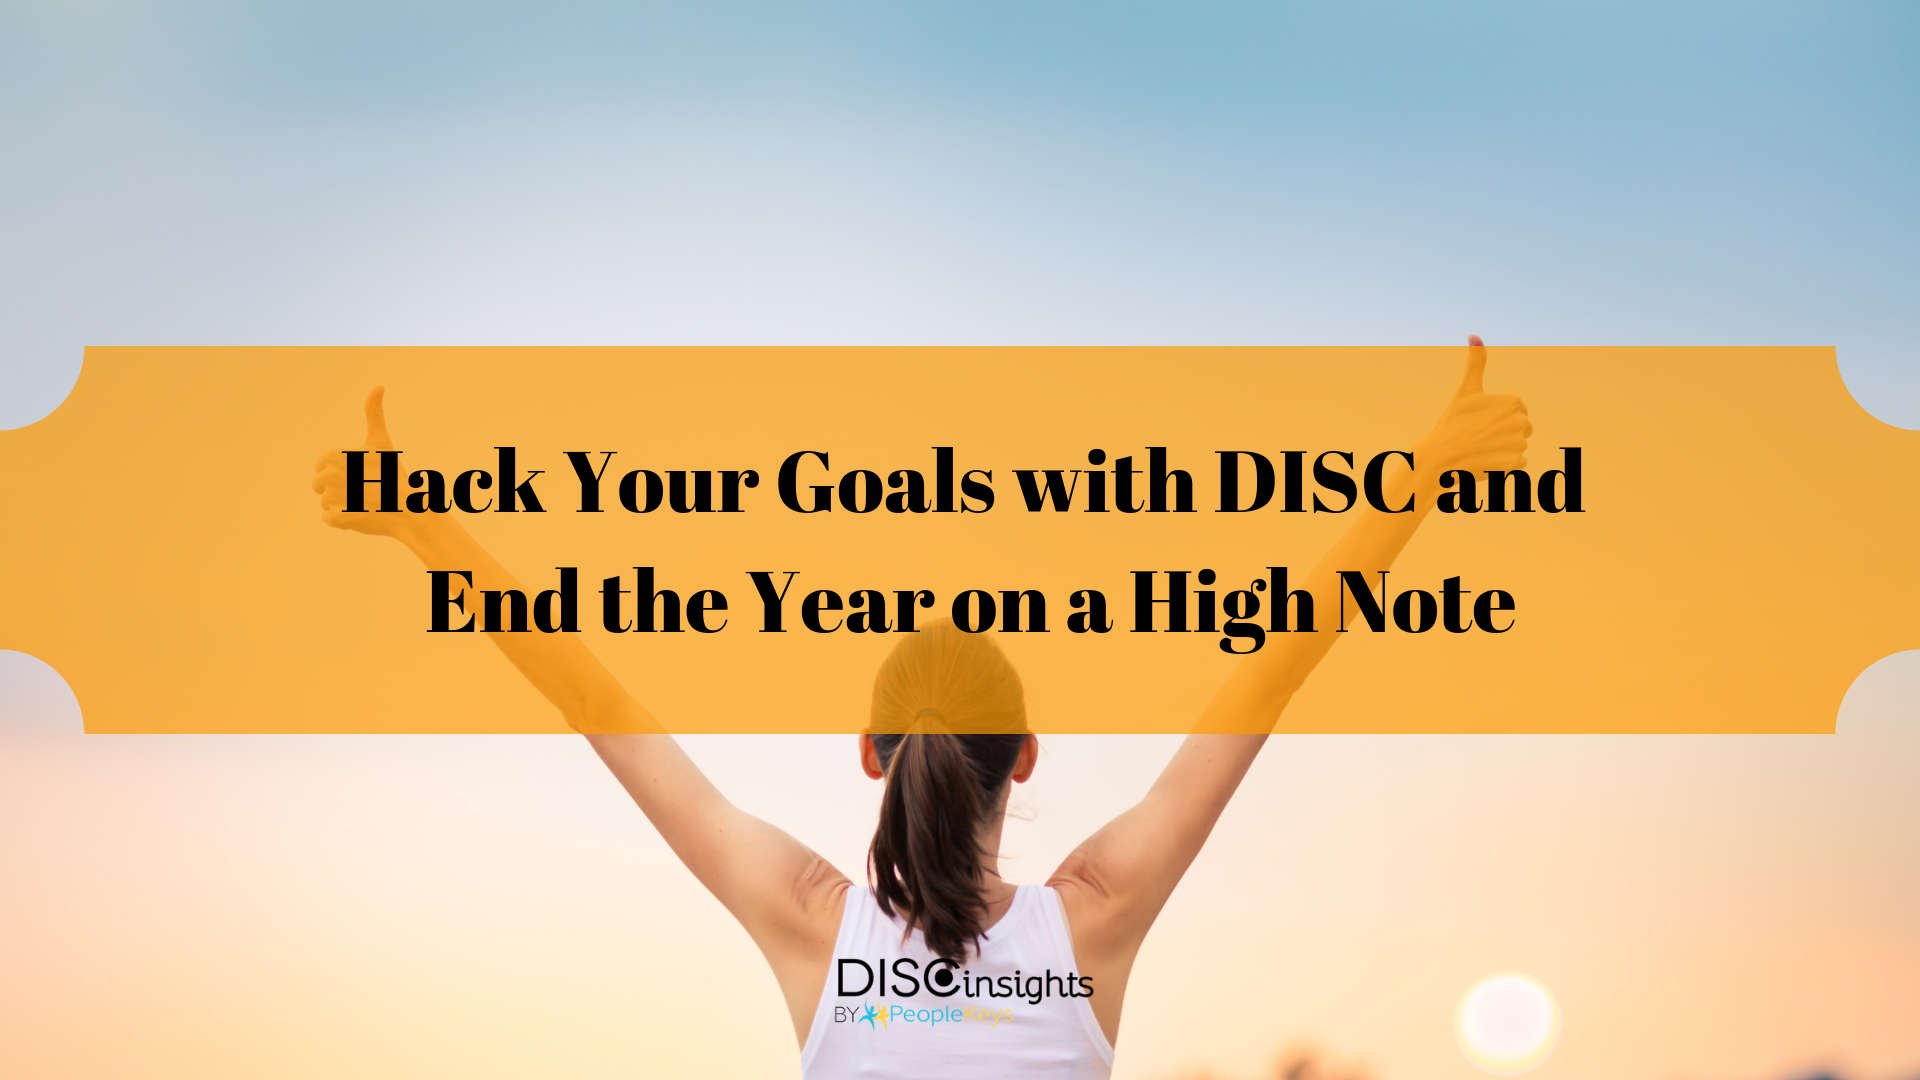 Hack Your Goals with DISC and End the Year on a High Note